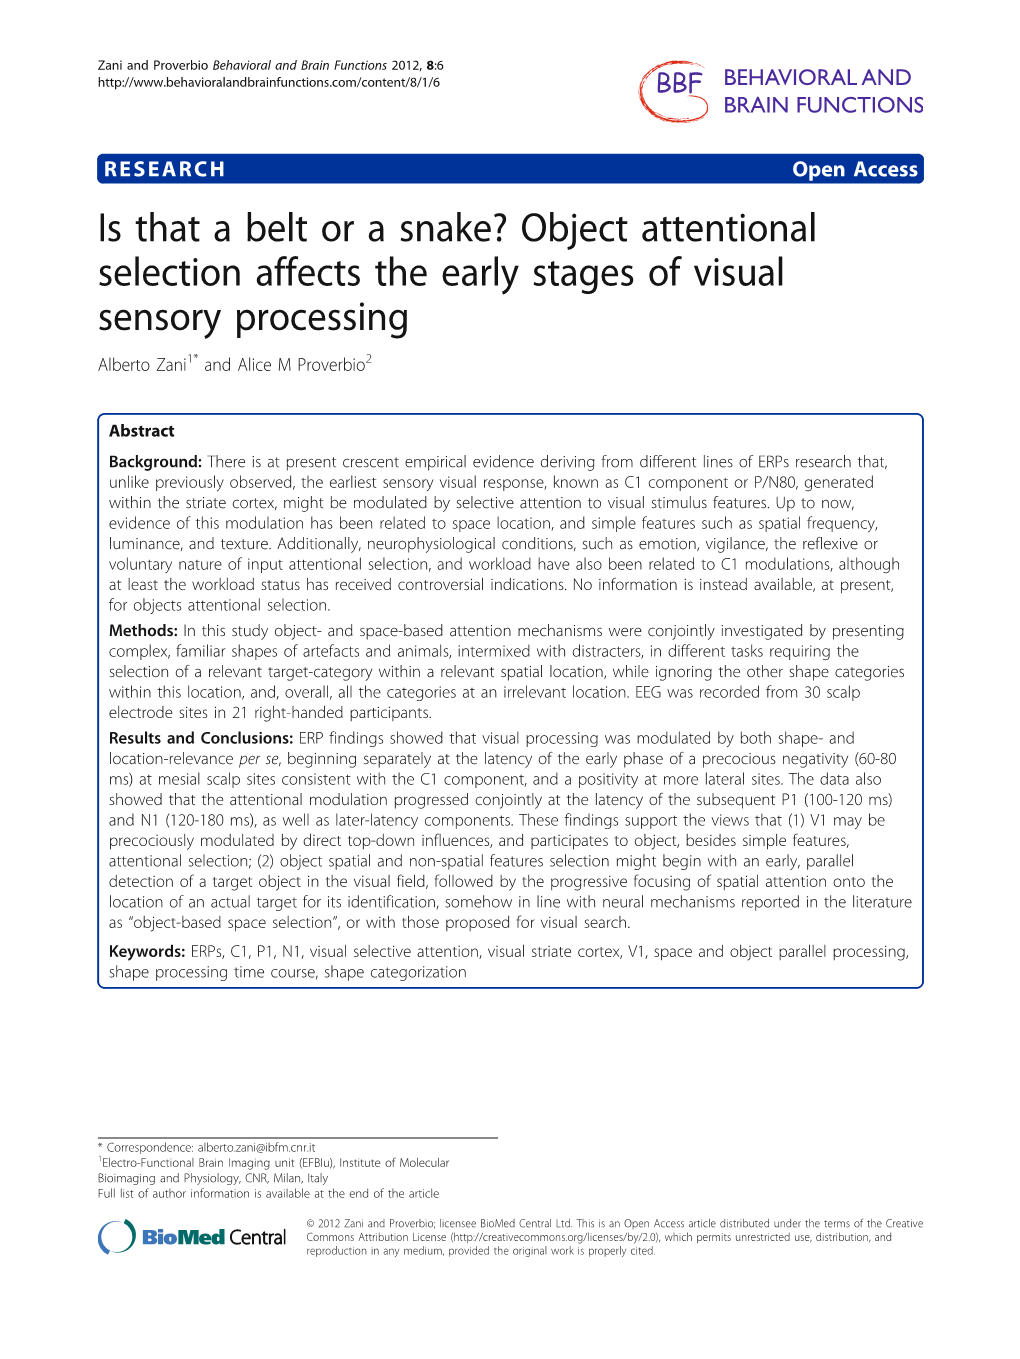 Object Attentional Selection Affects the Early Stages of Visual Sensory Processing Alberto Zani1* and Alice M Proverbio2